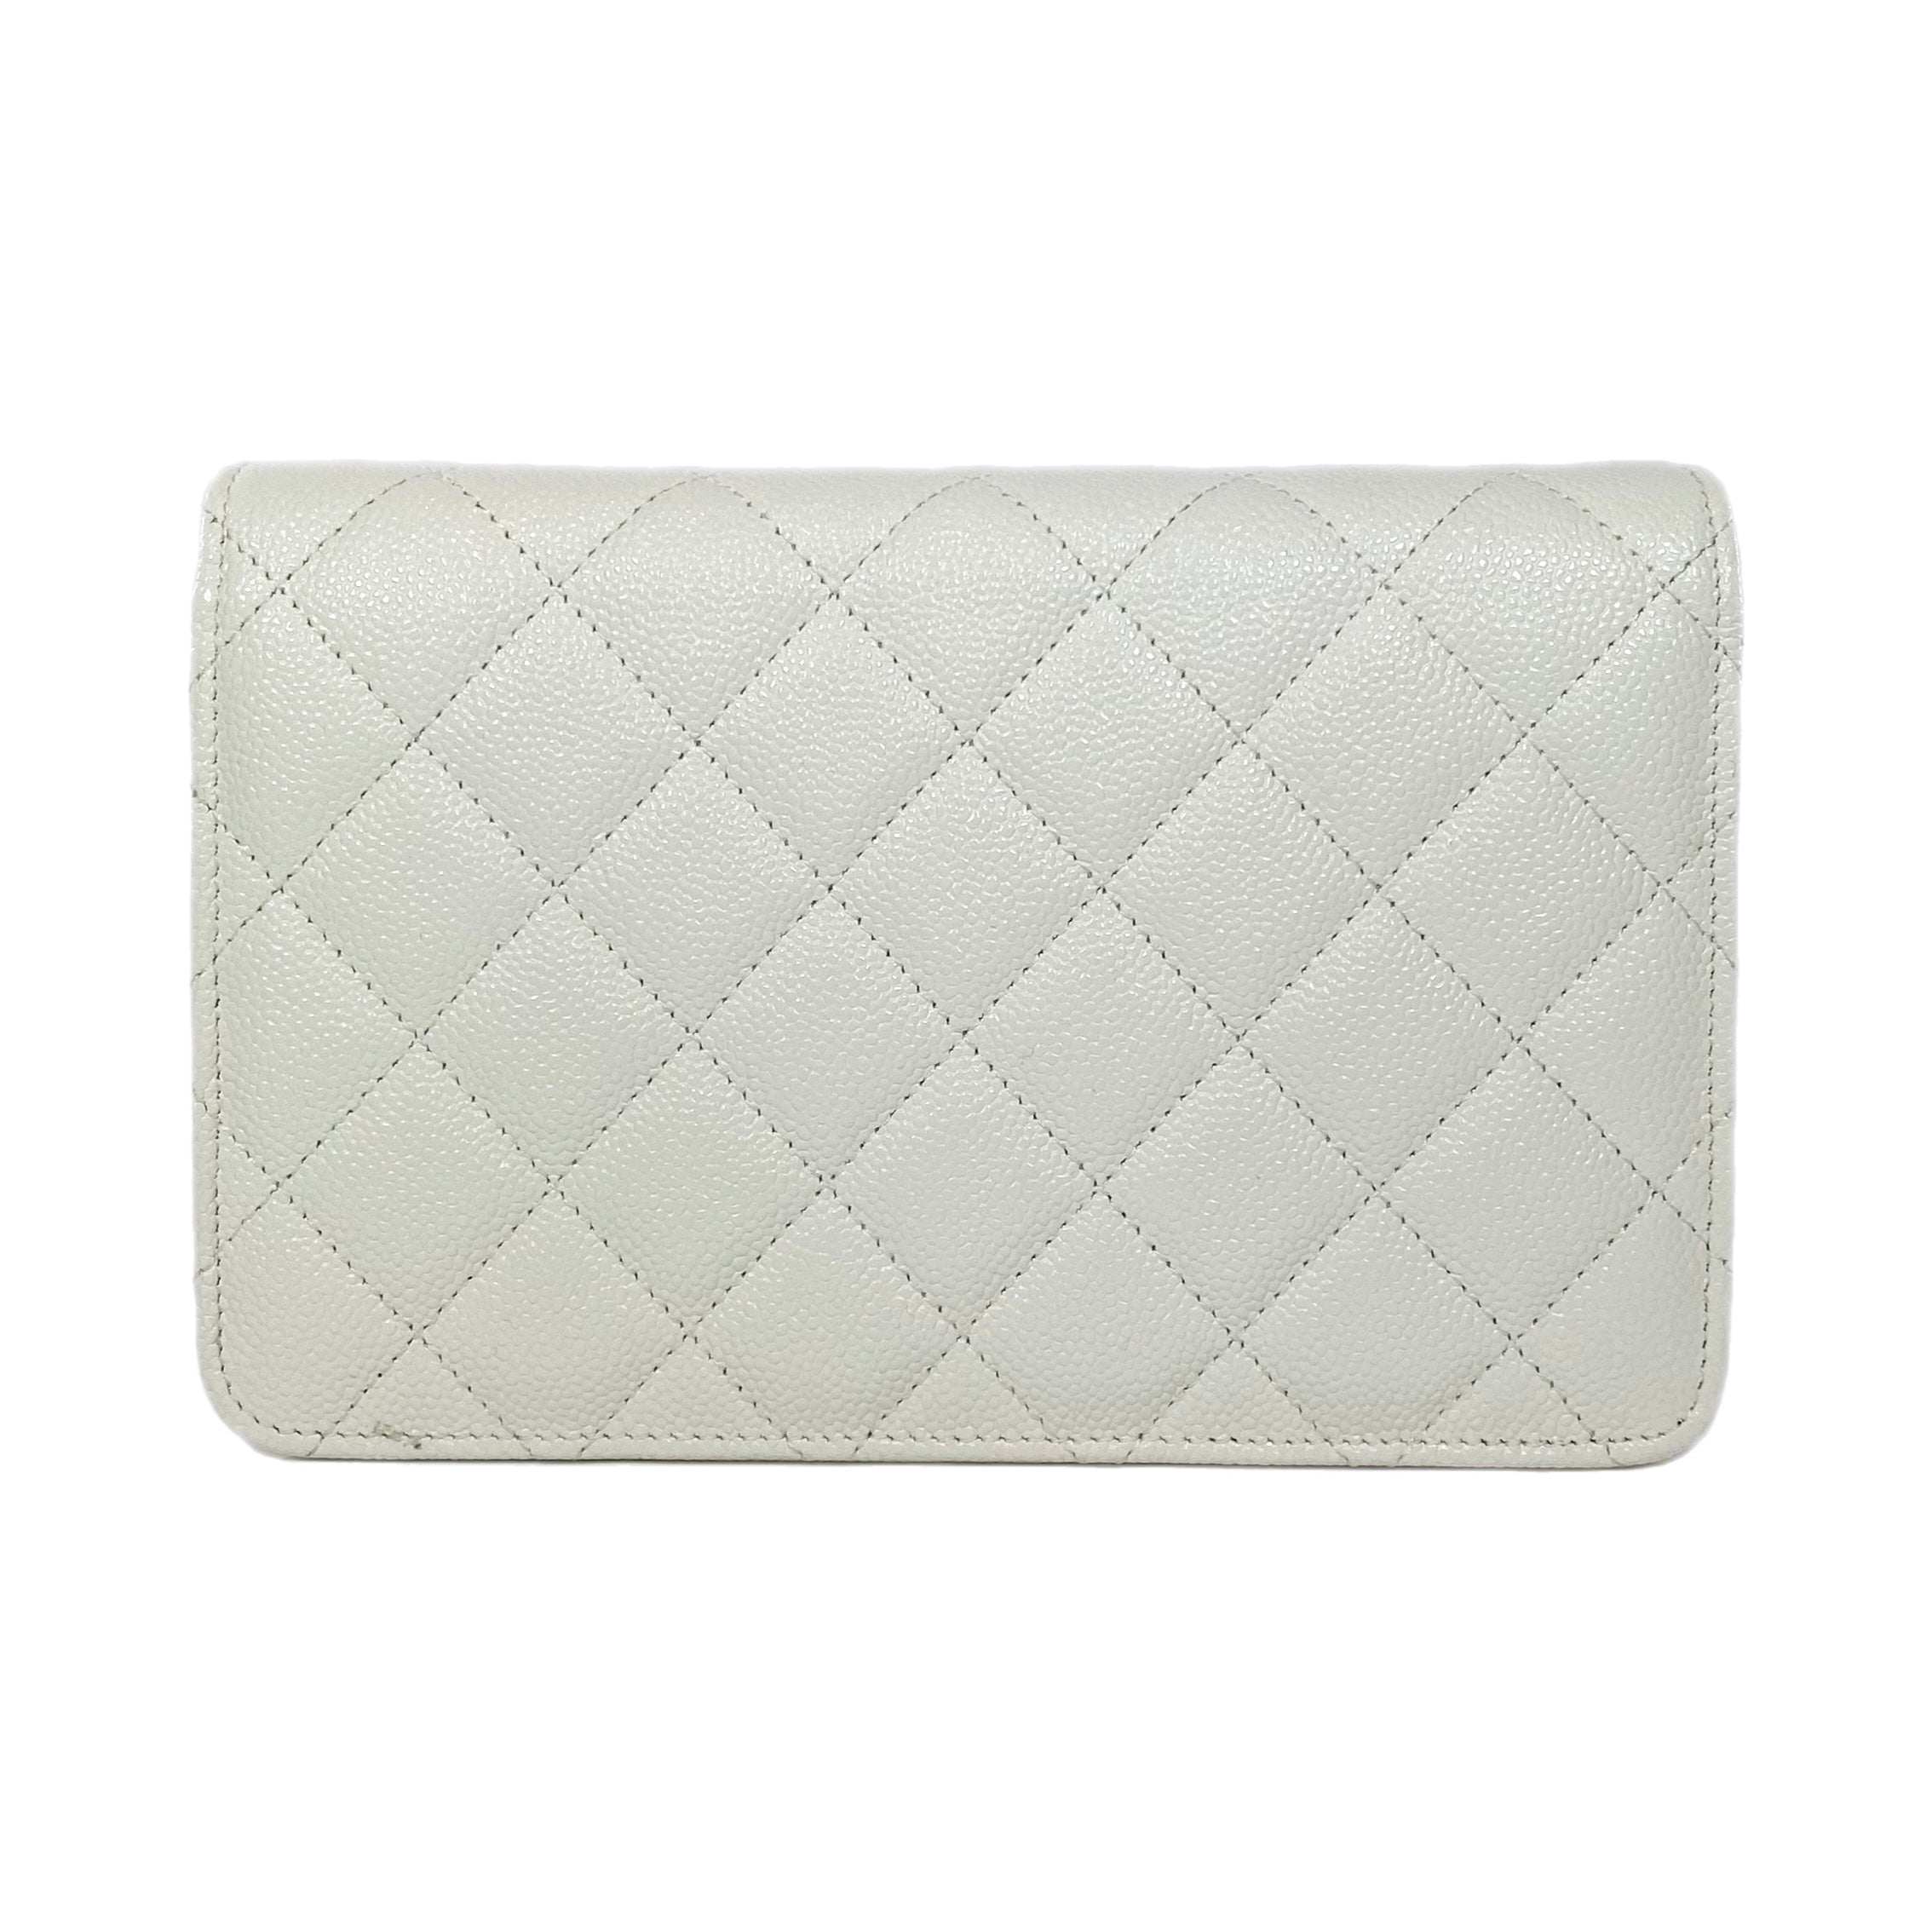 Chanel Ivory Wallet On Chain